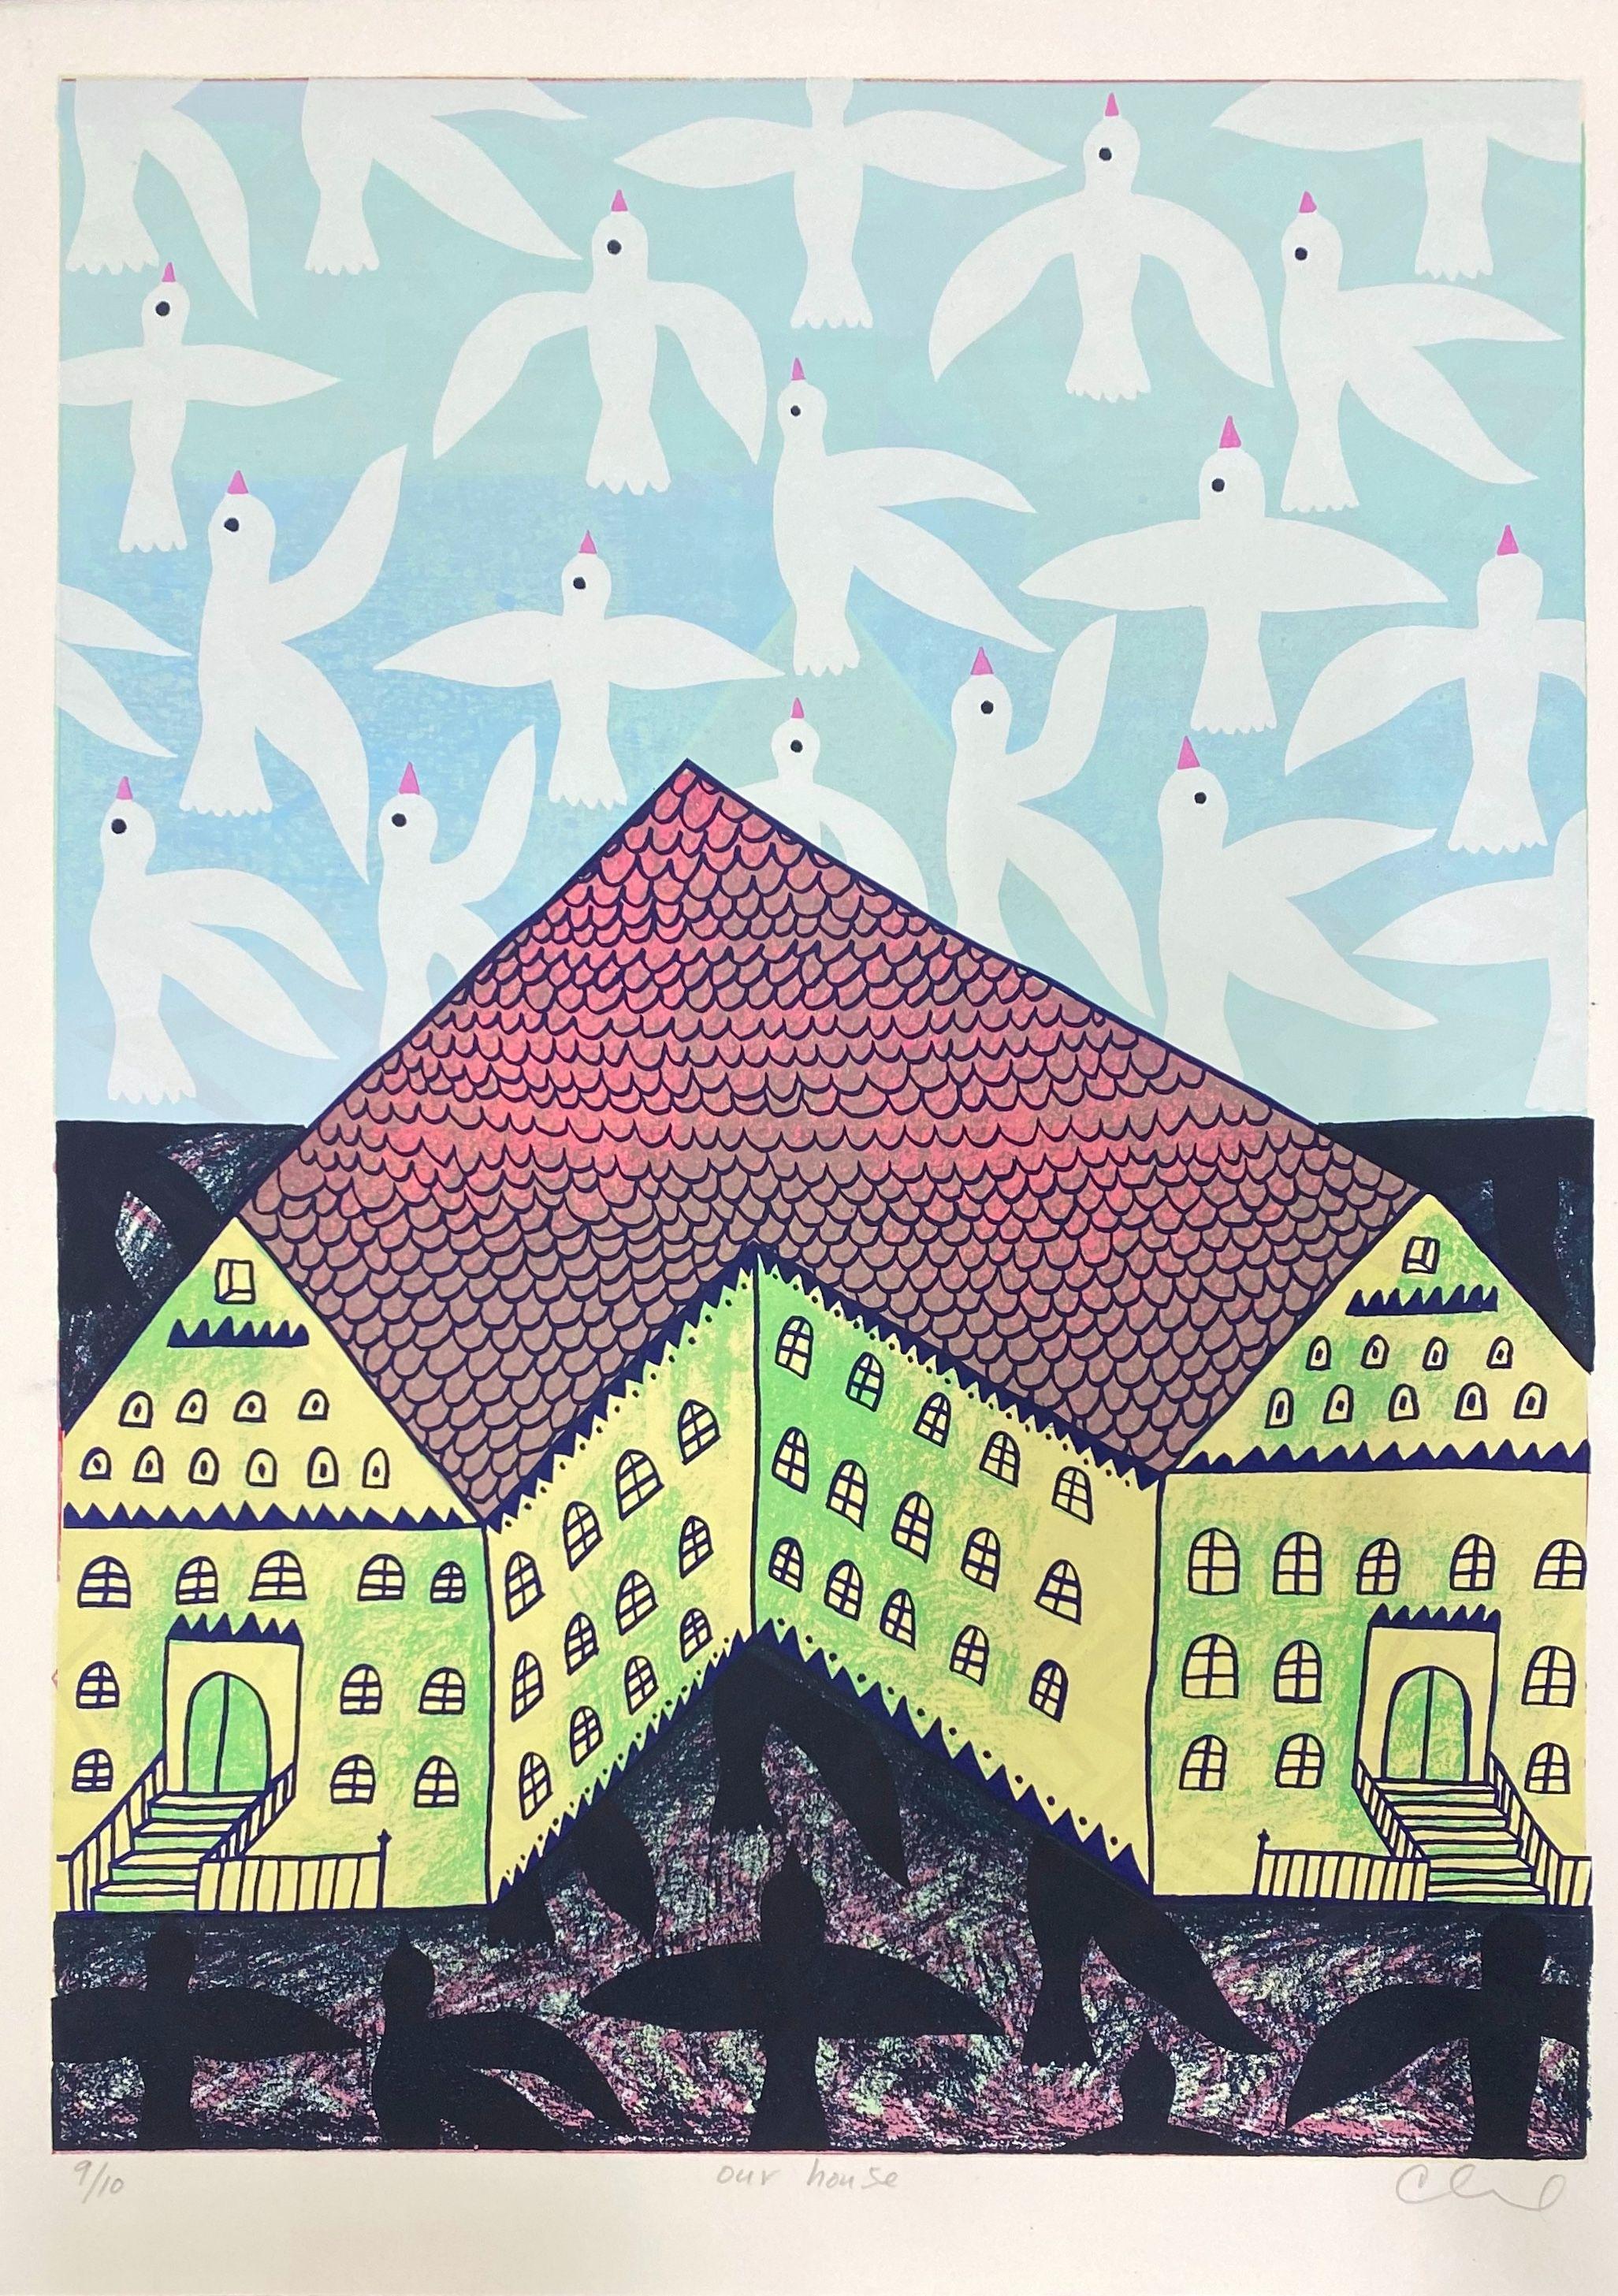 Chadwick Tolley Abstract Print - Our House (8/10)